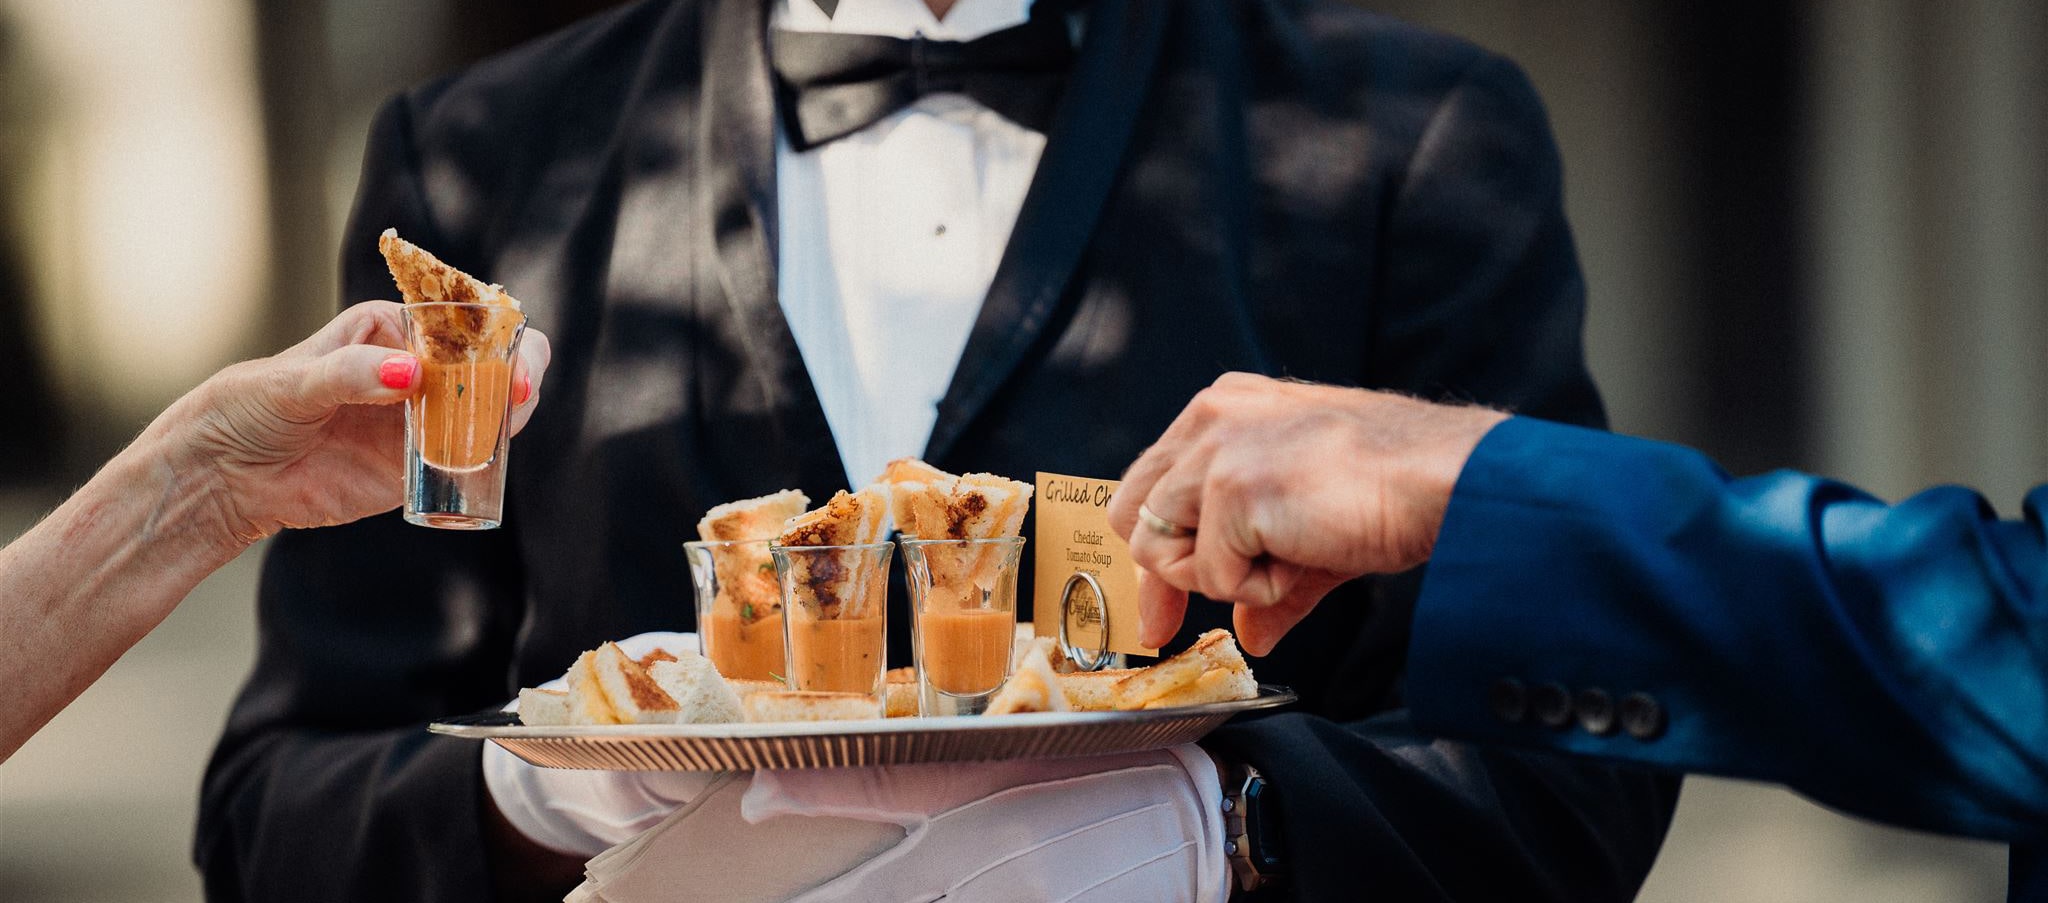 A waiter in a tuxedo holding a plate of grilled cheese sandwich bite in shot glasses with cheese at the bottom appetizers. Two people are grabbing an appetizer.